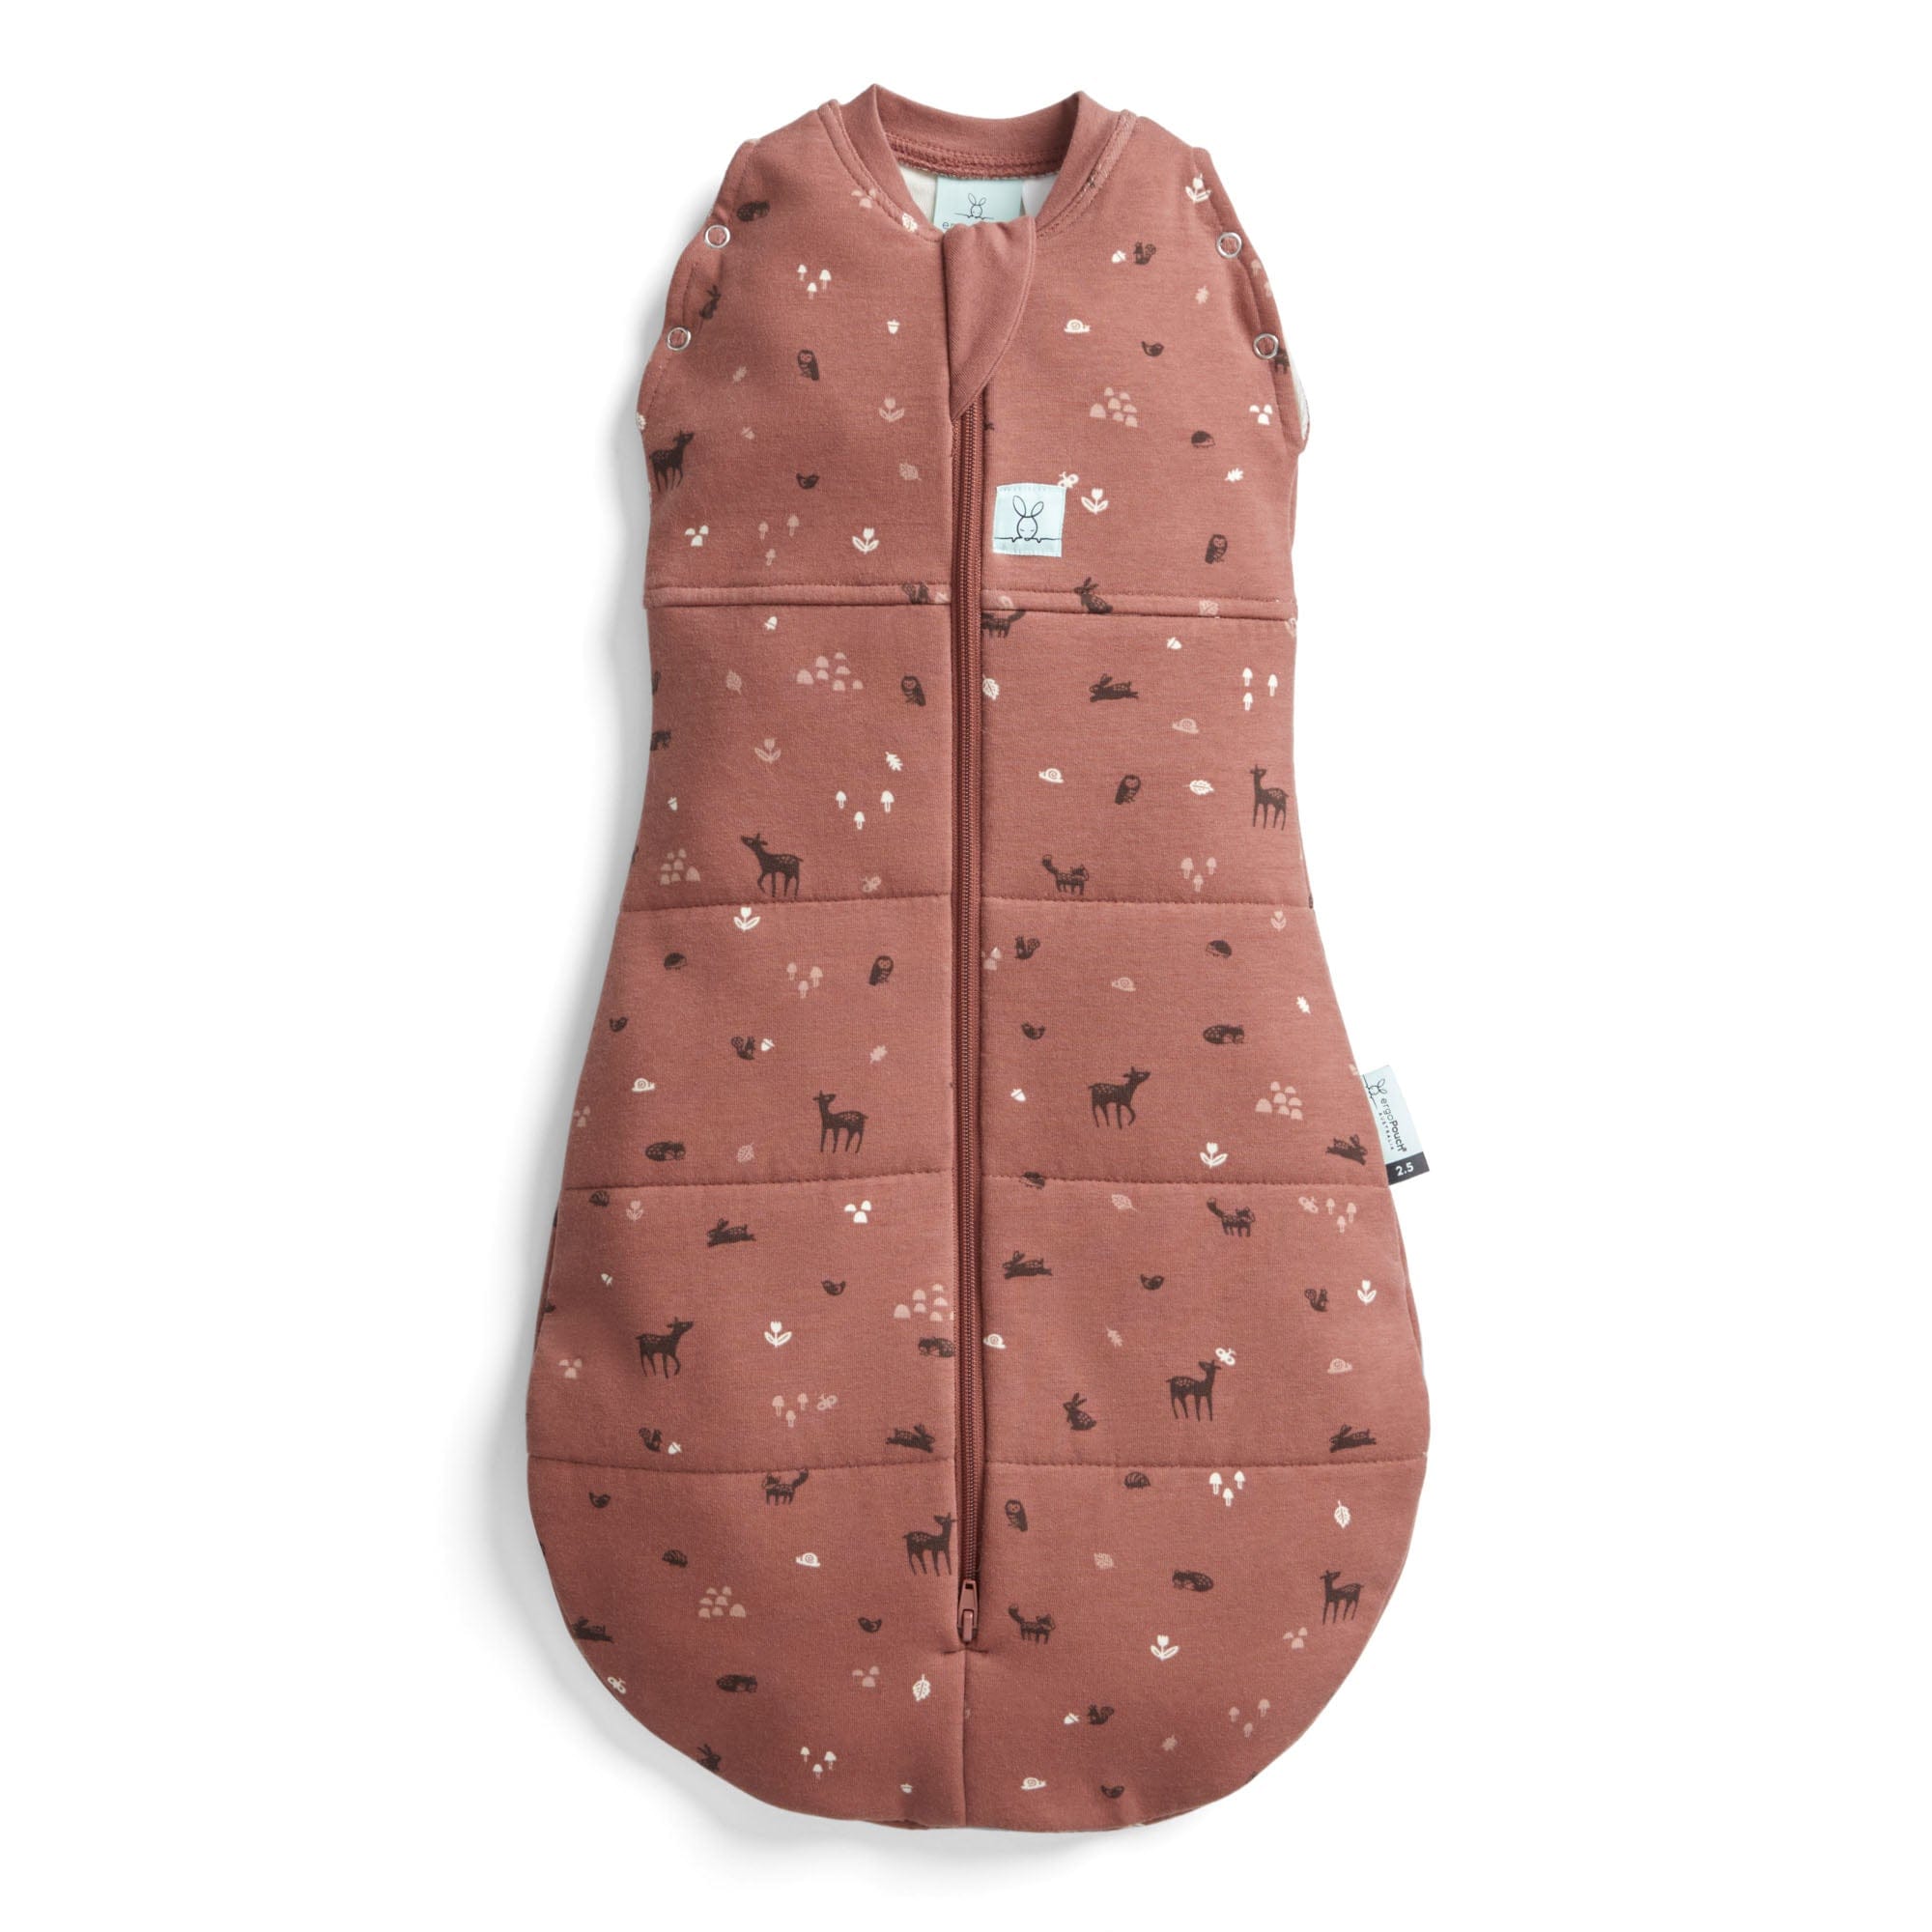 Cocoon Swaddle Bag 2.5 Tog For Baby By ergoPouch - Forest Friends